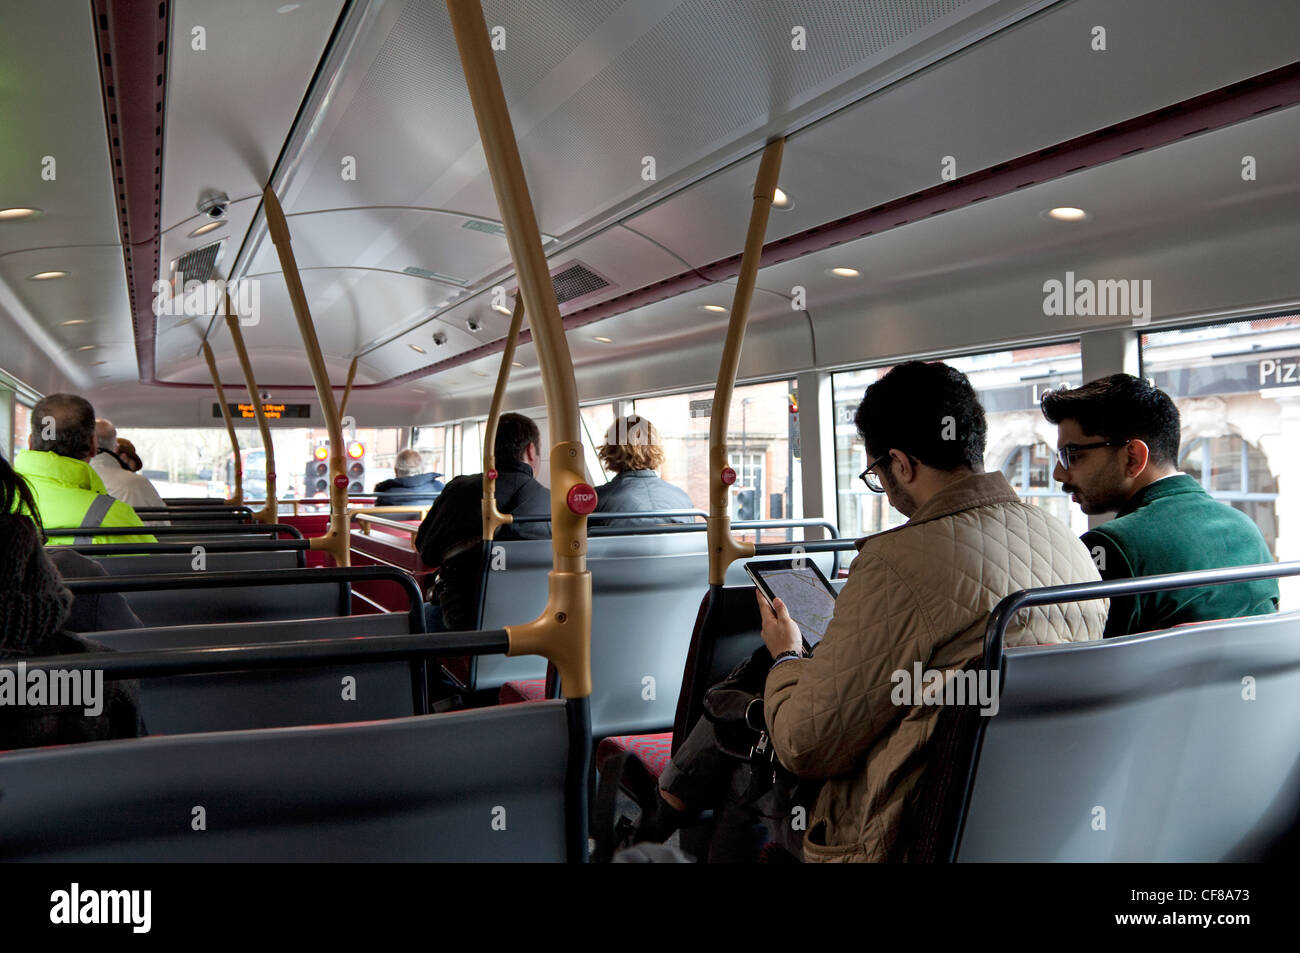 New Routemaster bus, London - upper deck Stock Photo